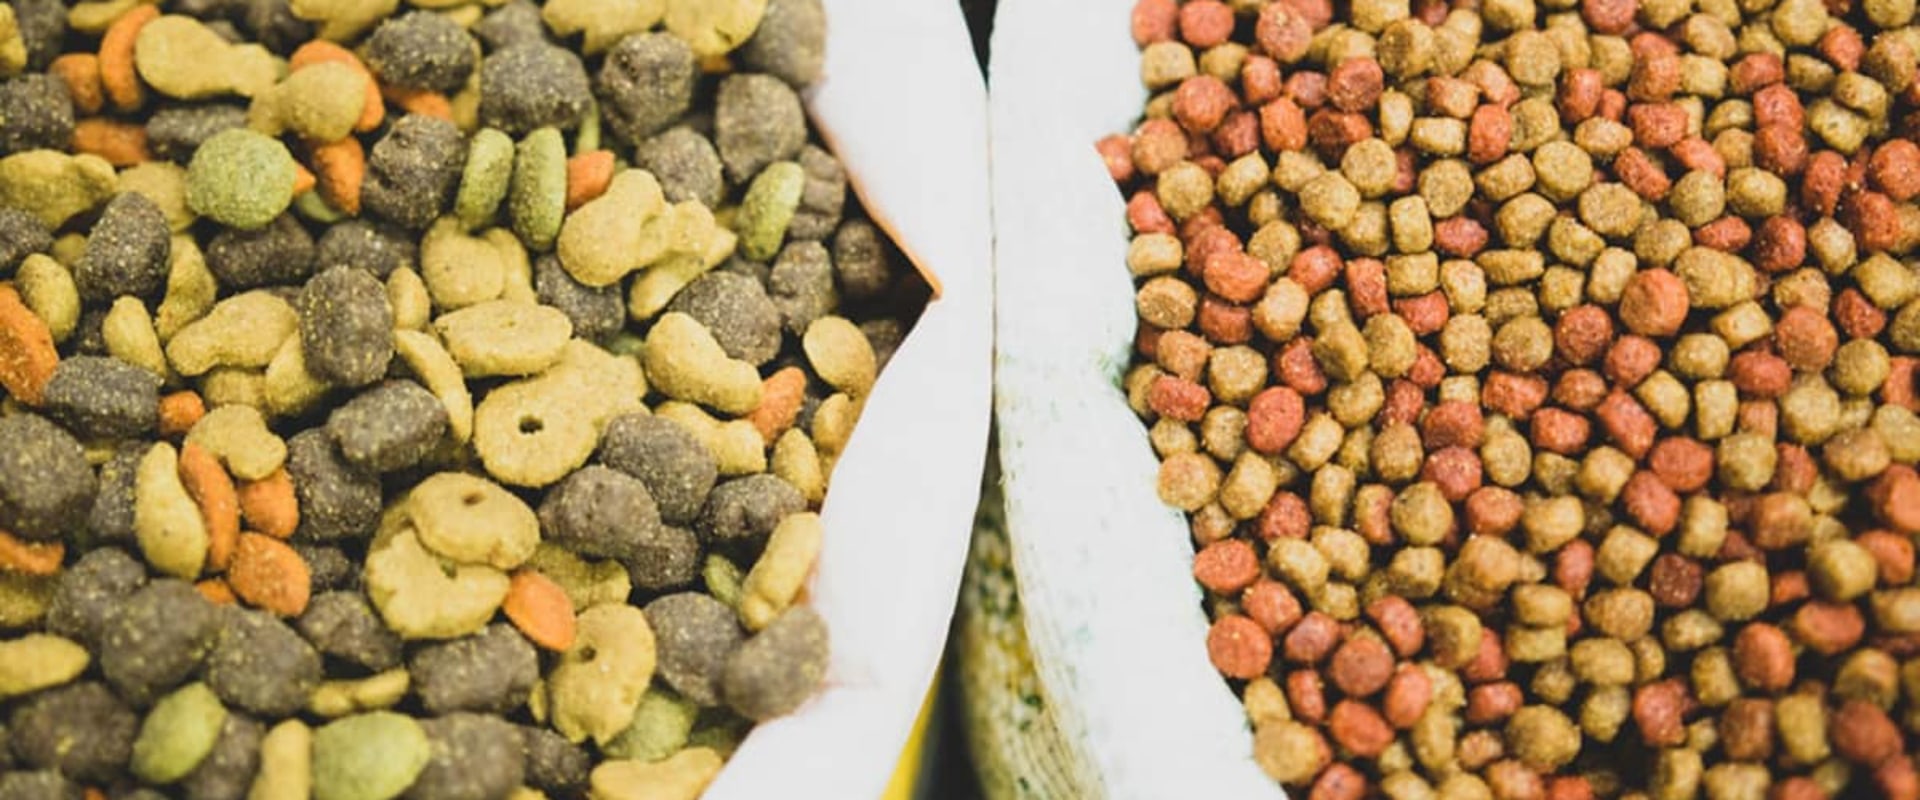 What do vets recommend as the best dog food?